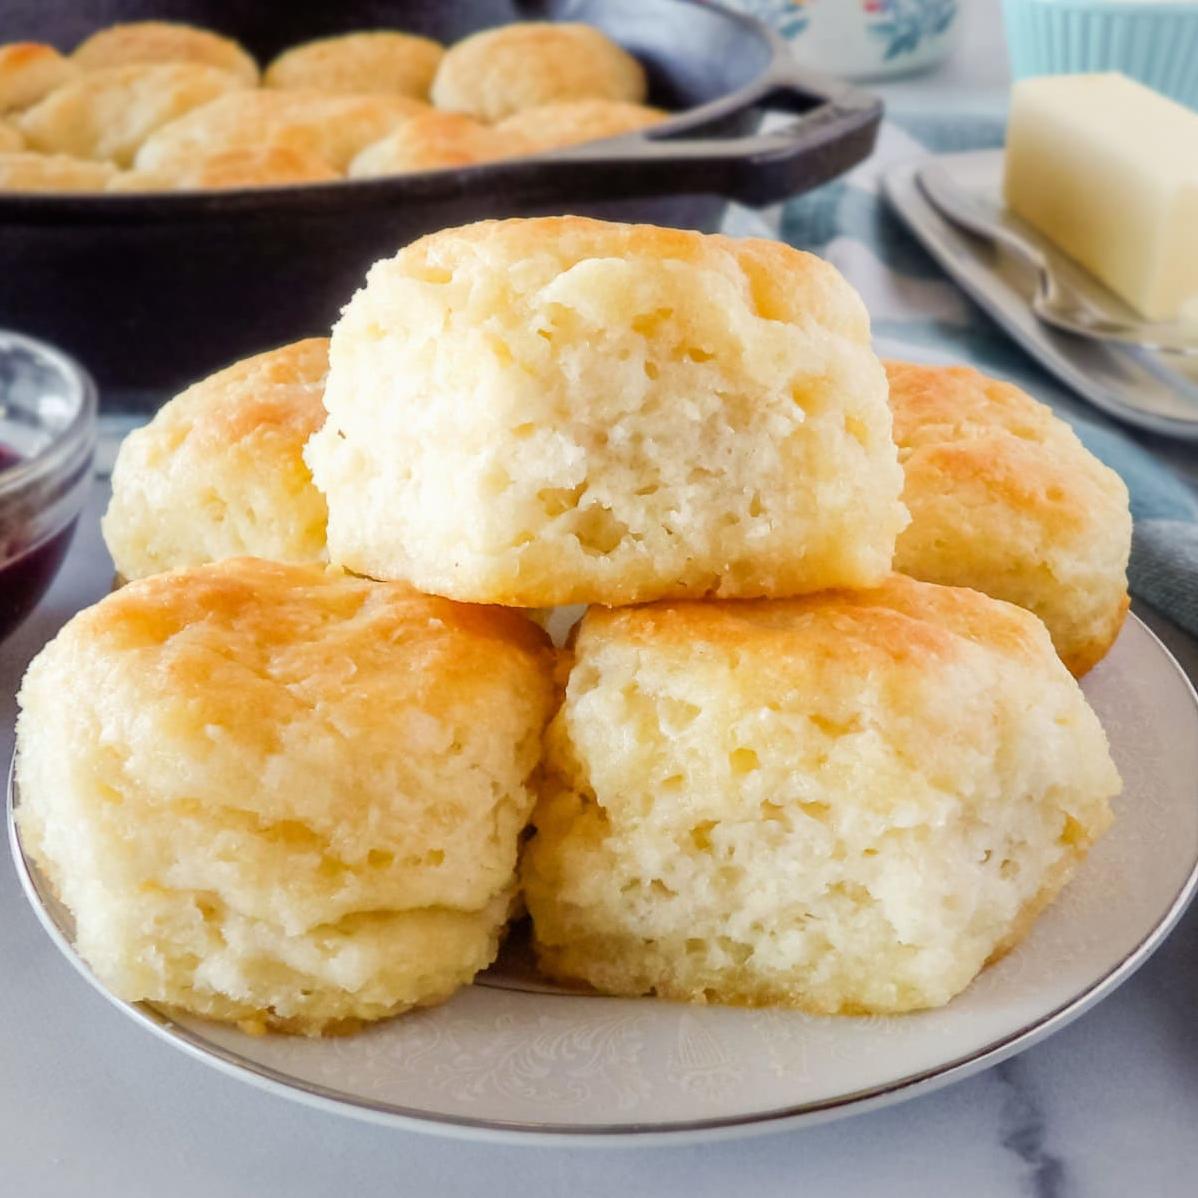 Delicious Southern breakfast biscuits recipe.